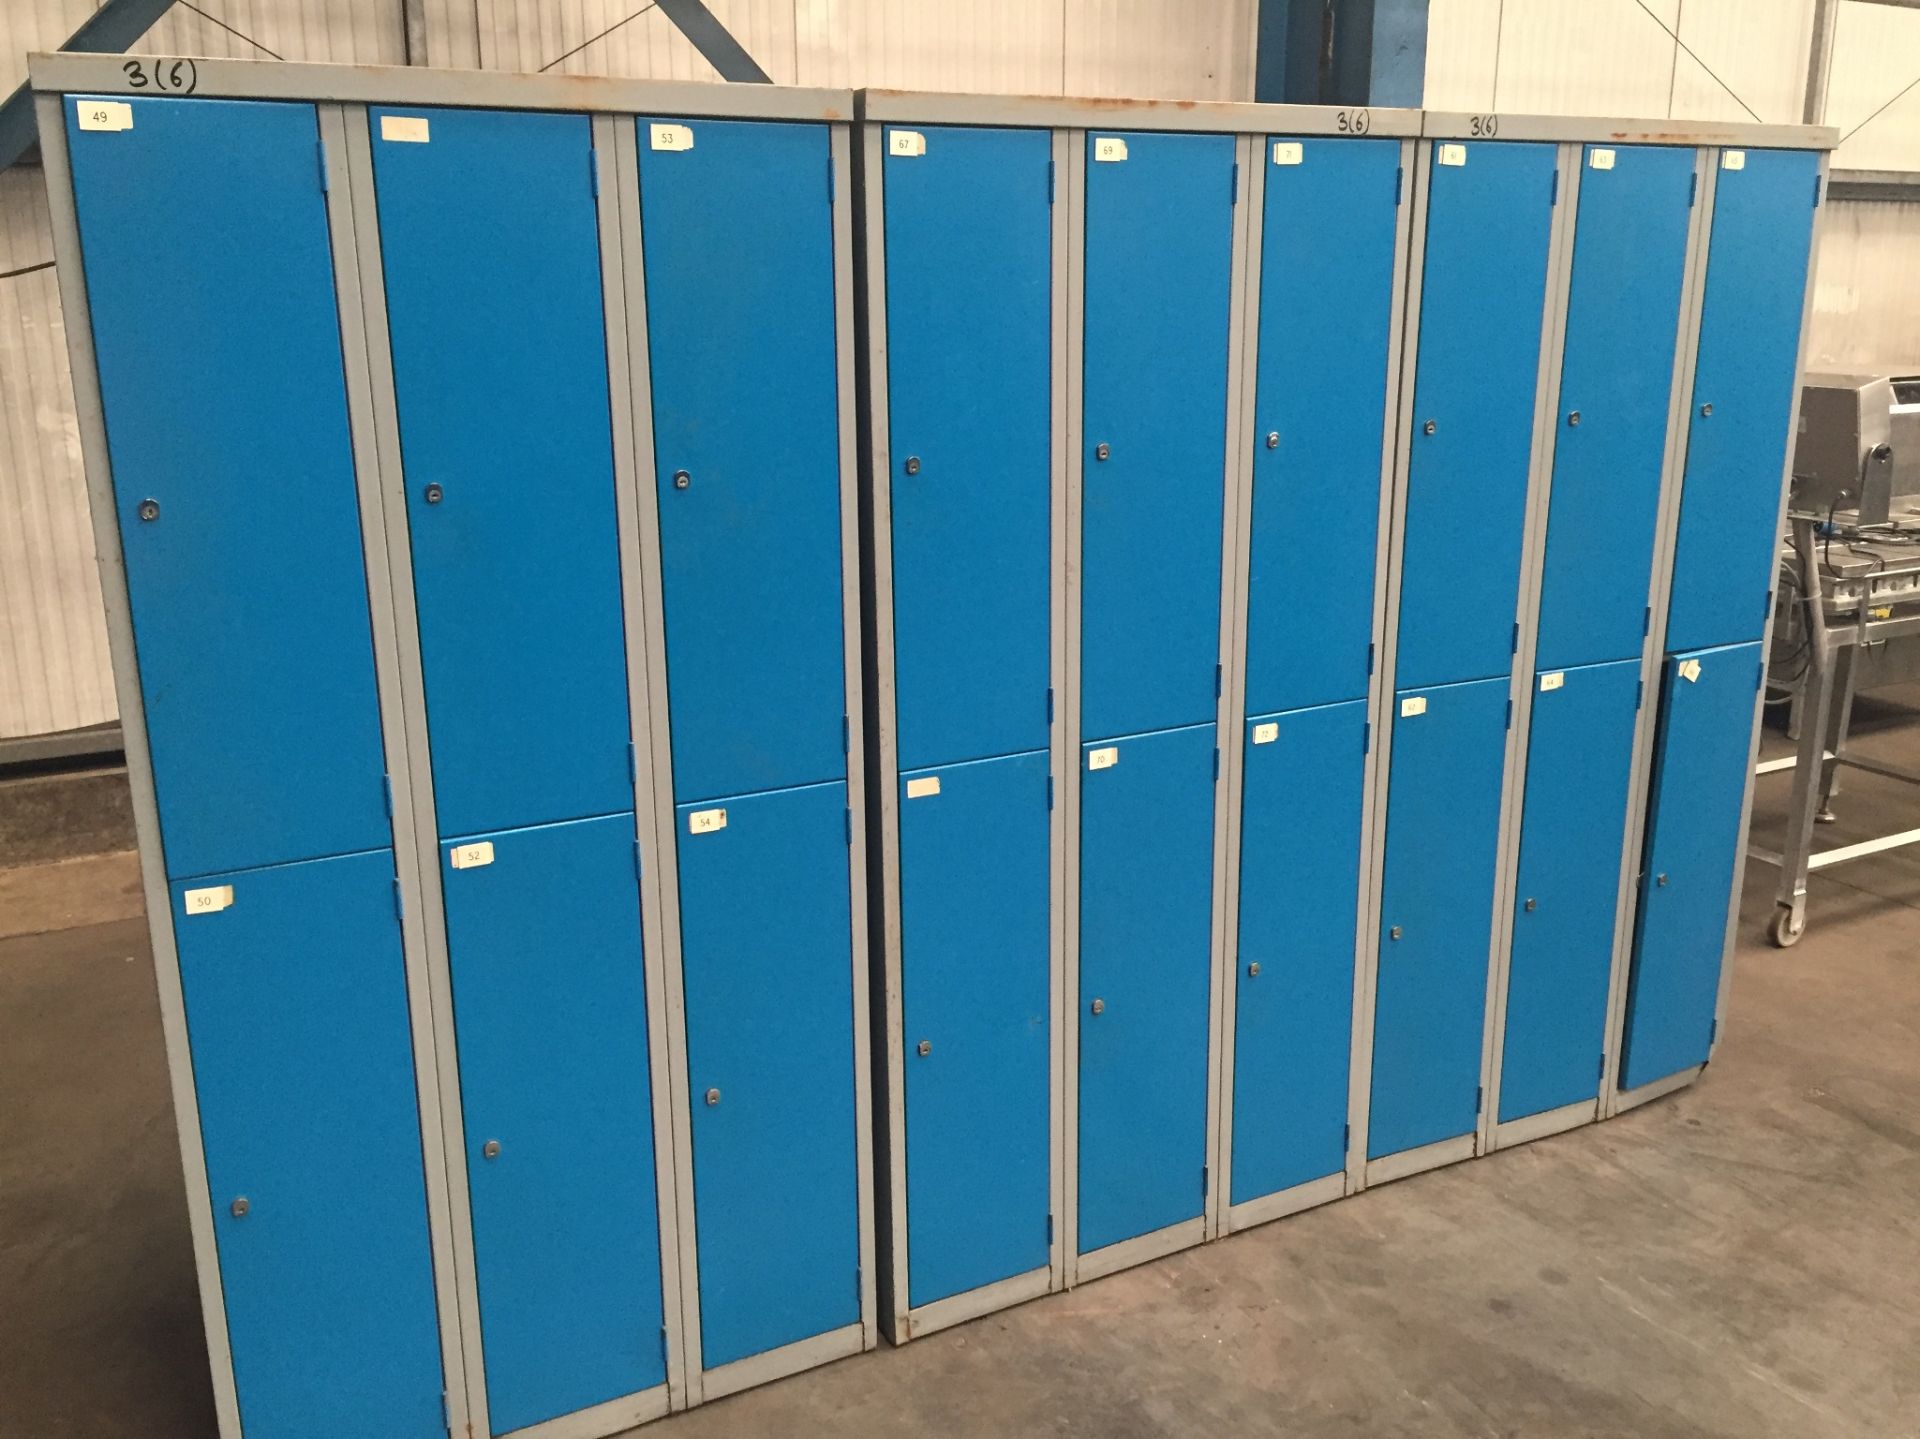 3 x lockers, each with 6 compartments, dimensions: 1800 H x 900 W x 460 Lift out charge to be